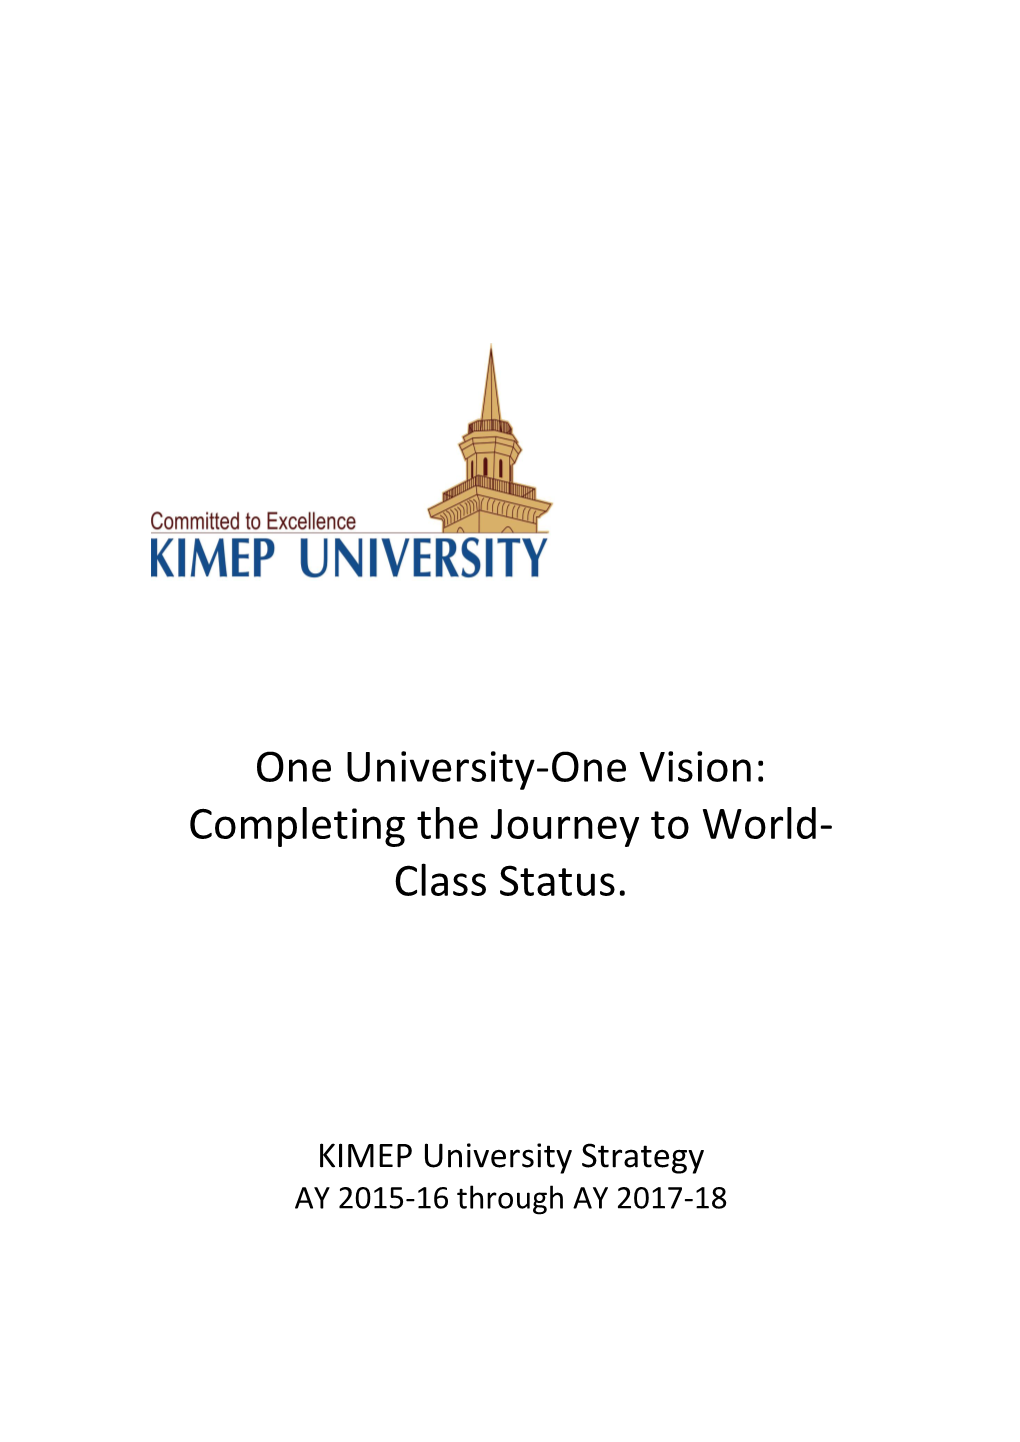 One University-One Vision: Completing the Journey to World- Class Status